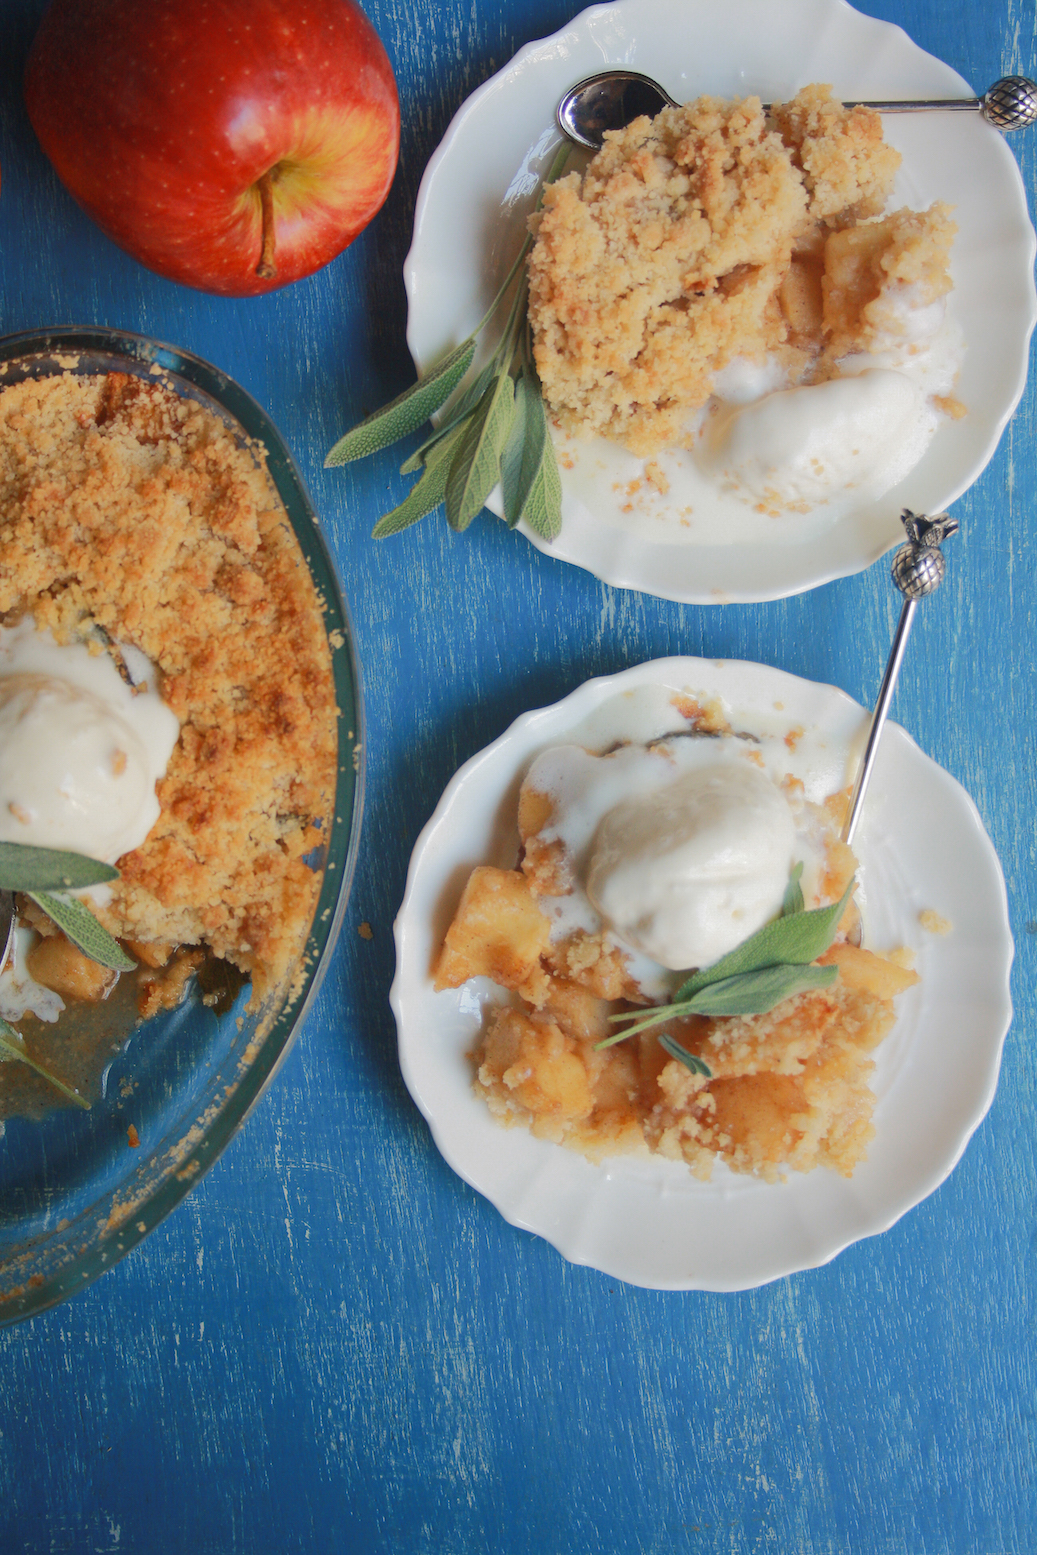 Classic apple crumble taken up a notch with the subtle, floral aroma of fresh sage leaves!